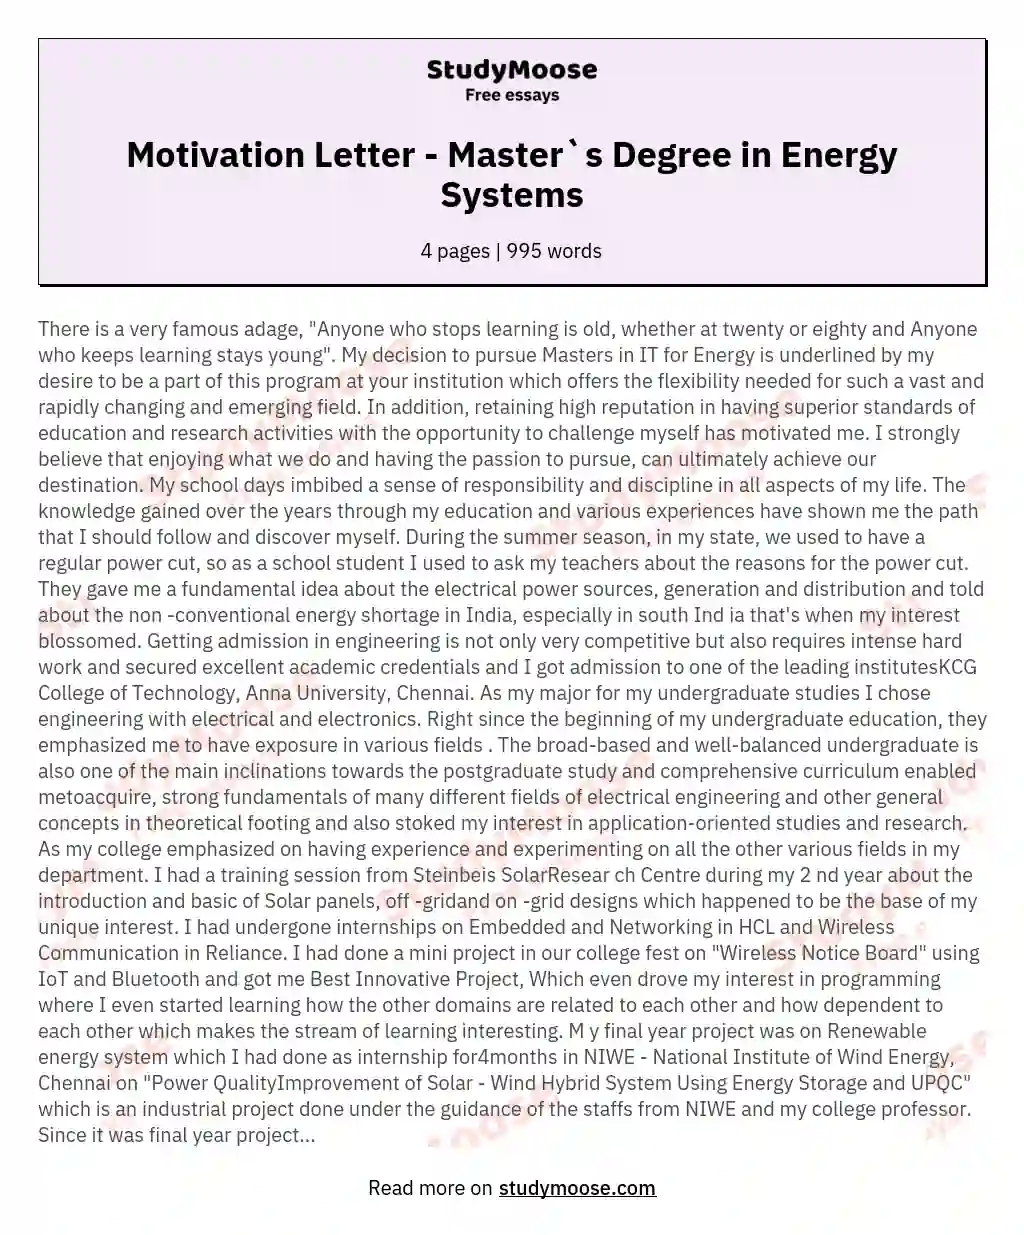 Motivation Letter - Master`s Degree in Energy Systems essay